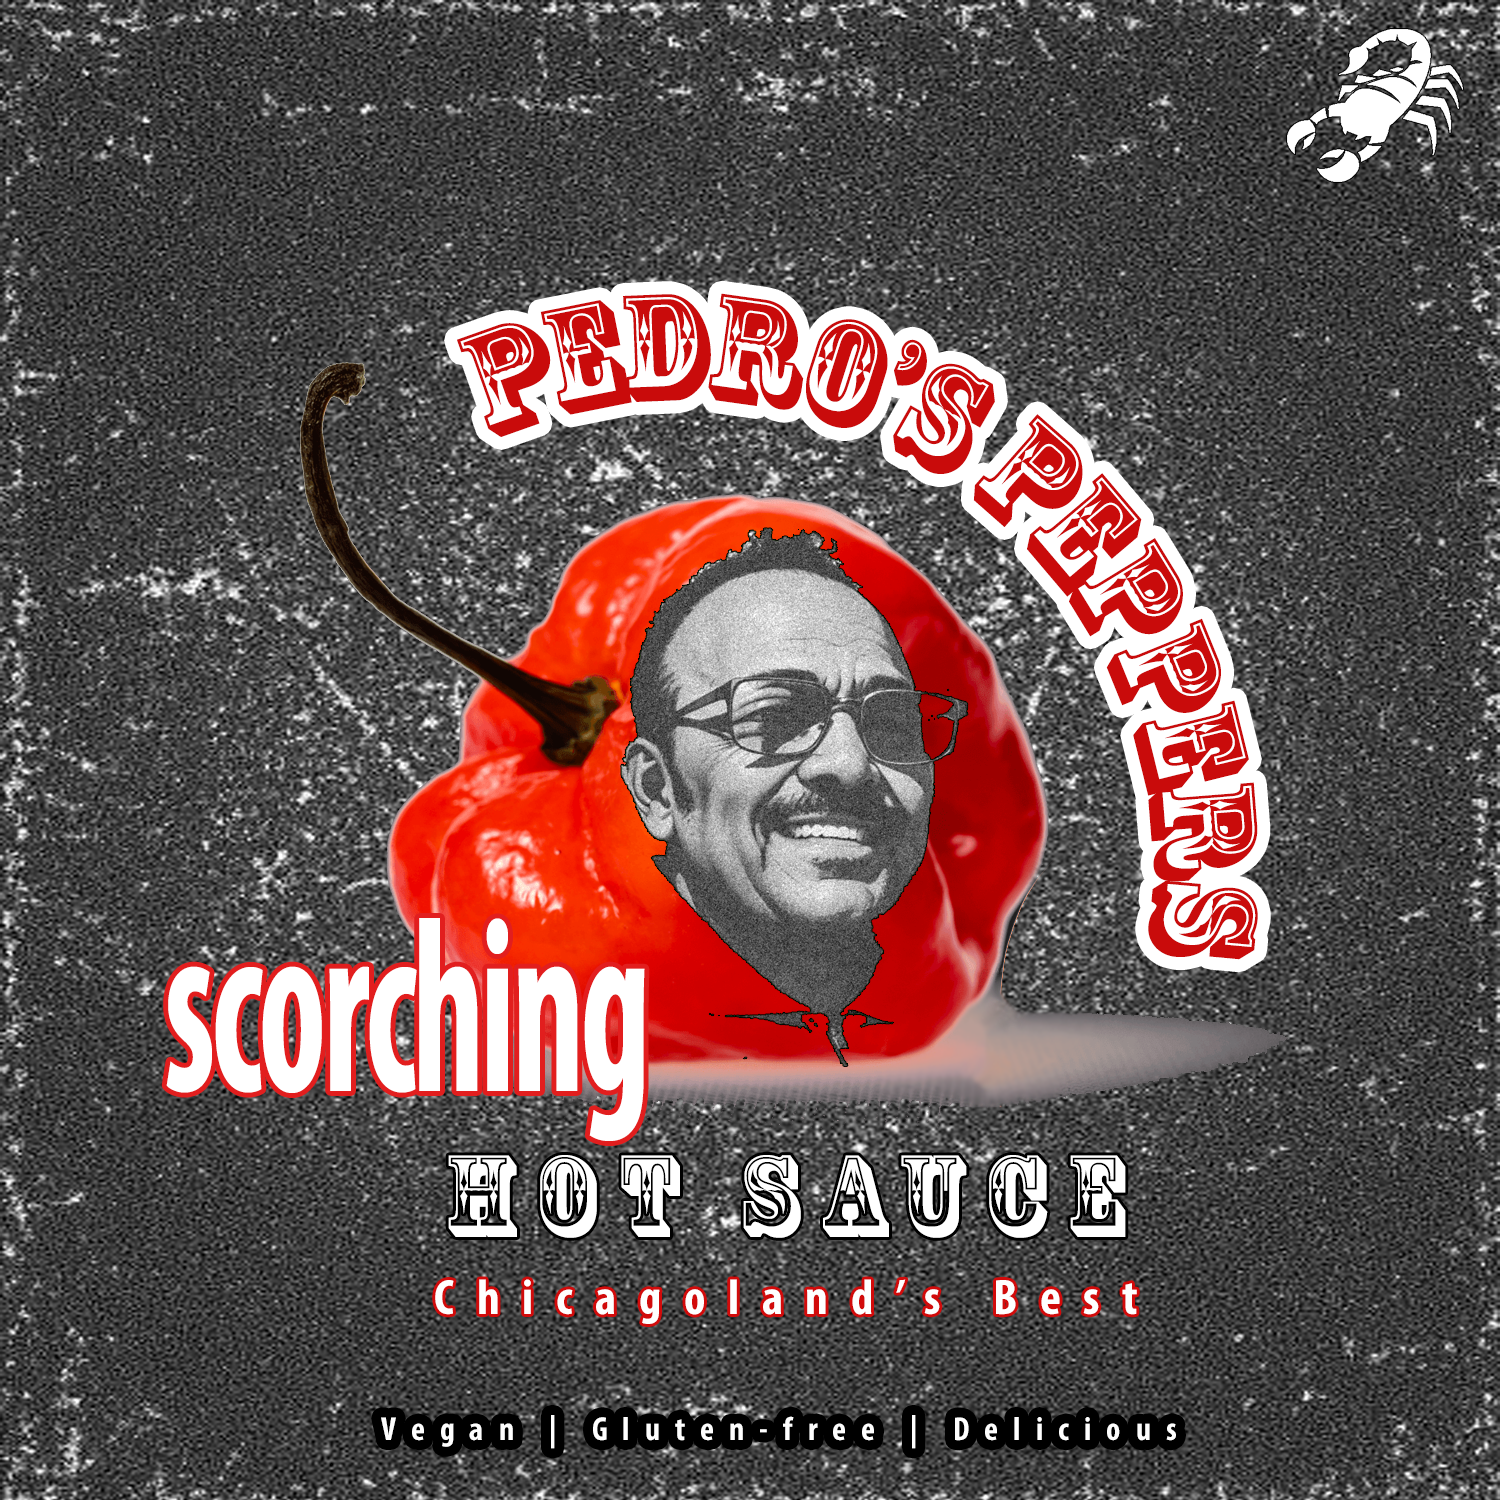 Small Batch Bottle Label Design Pedro's Peppers Hot Sauce